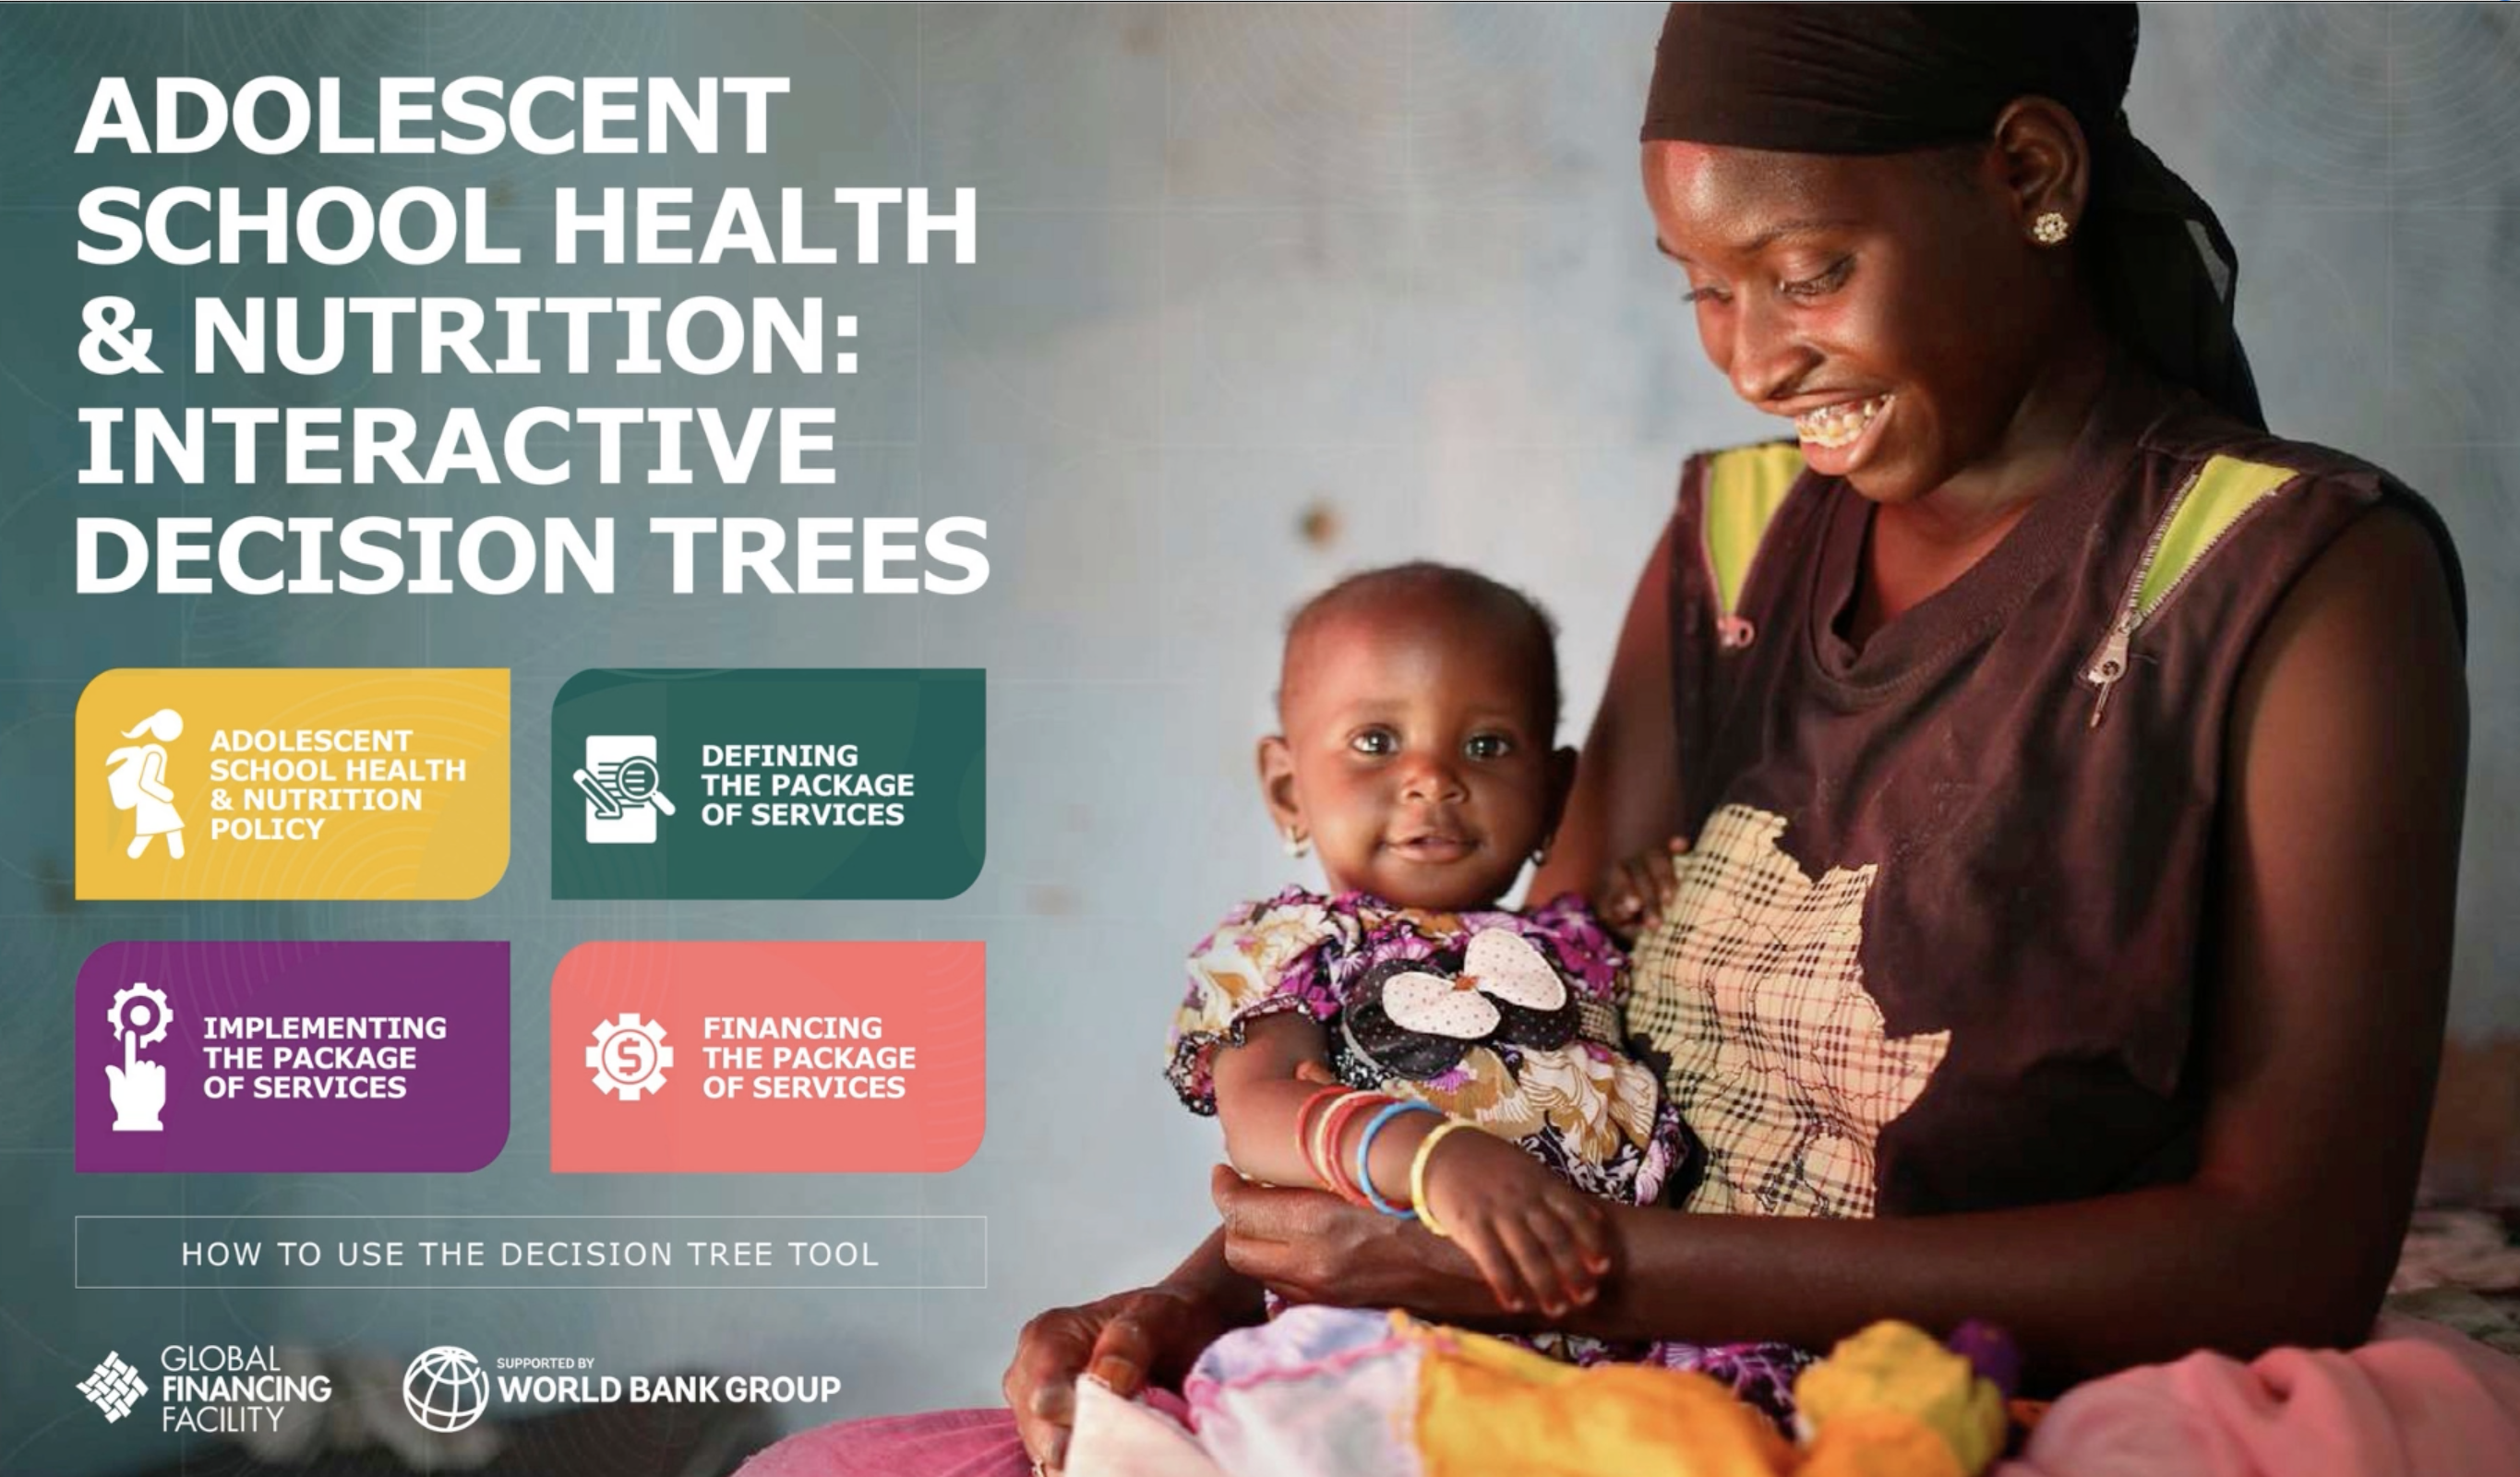 Adolescent School Health and Nutrition: Interactive Decision Trees